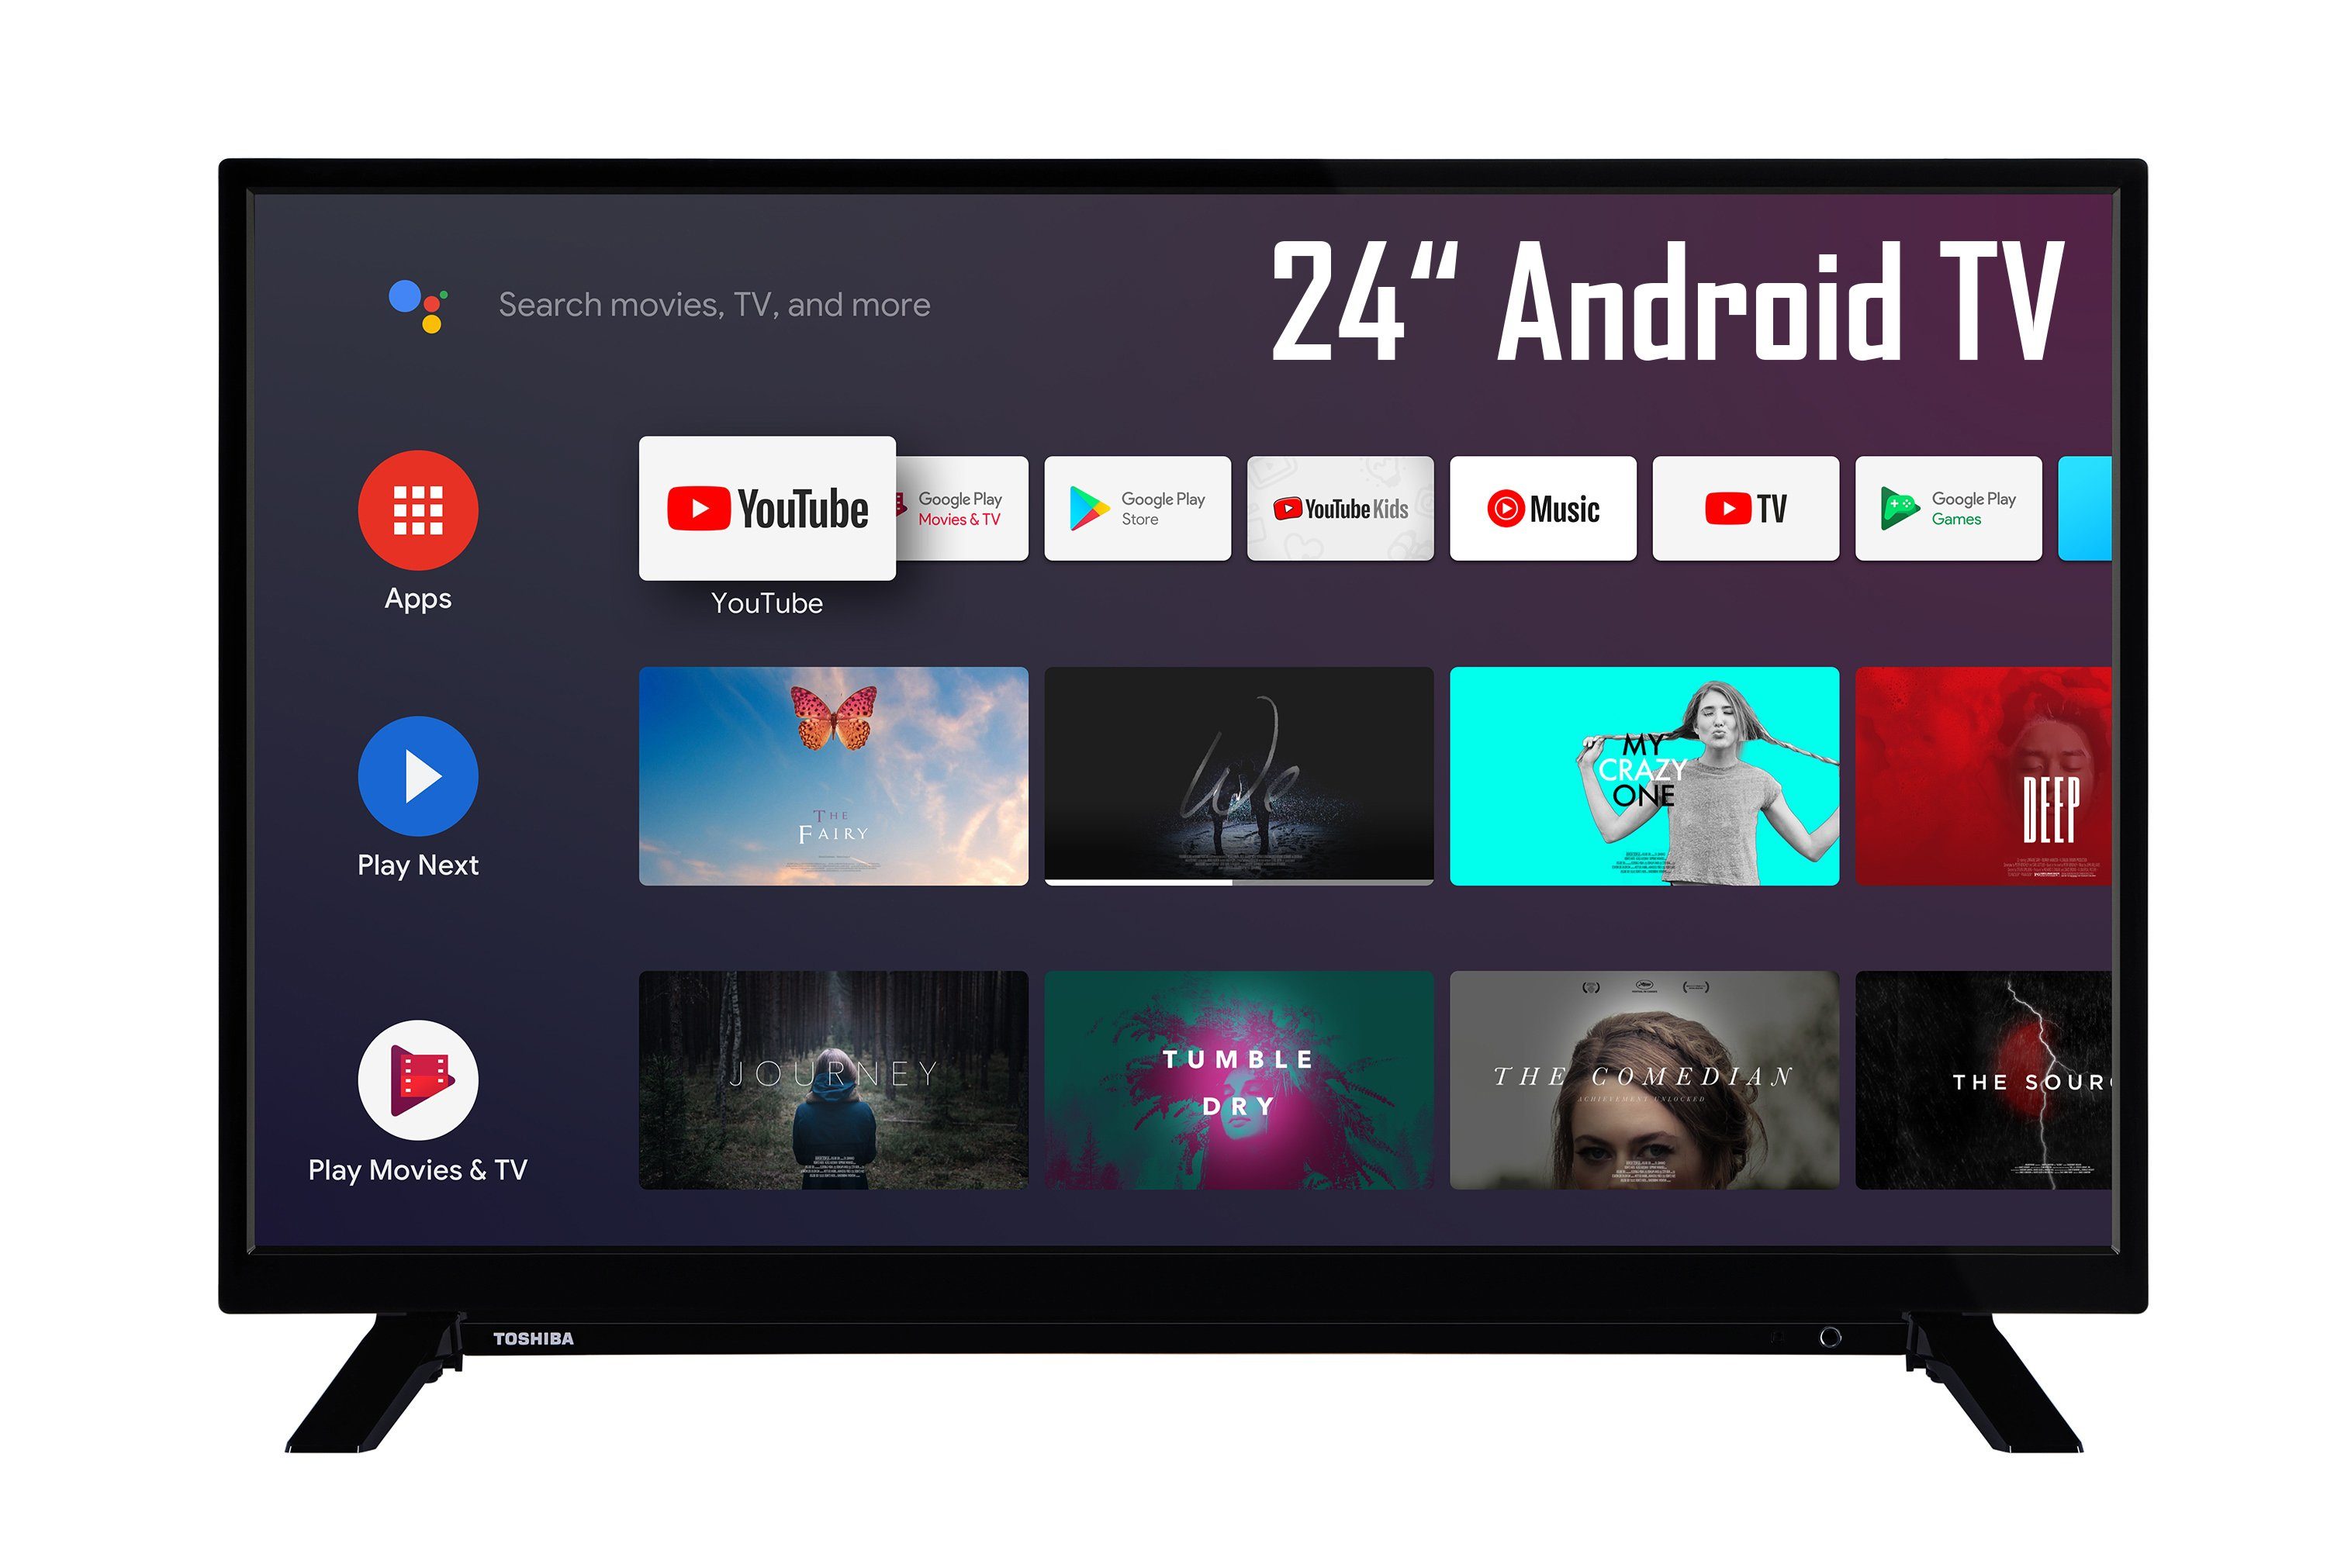 Toshiba 24WA2063DA LCD-LED Fernseher (80 cm/24 Zoll, HD-ready, Android TV,  Triple-Tuner, Bluetooth, WLAN, Google Play Store, Google Assistant, HDR10)